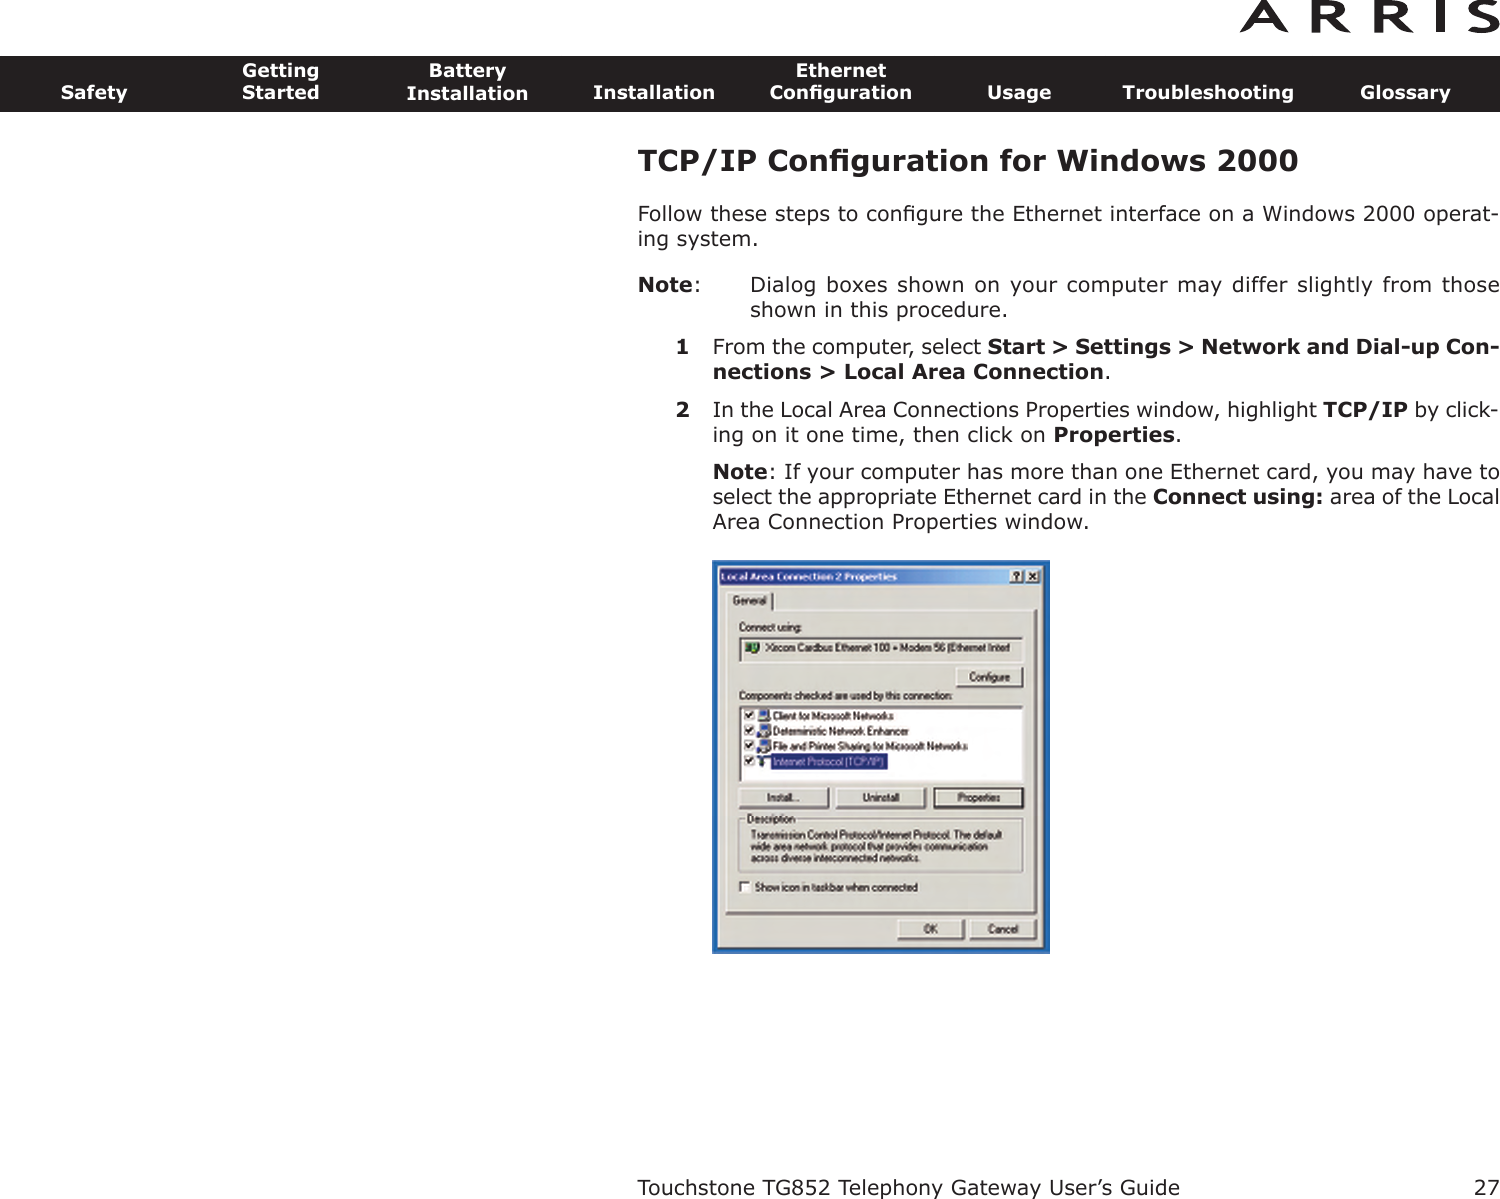 TCP/IP Conﬁguration for Windows 2000Follow these steps to conﬁgure the Ethernet interface on a Windows 2000 operat-ing system.Note: Dialog boxes shown on your computer may differ slightly from thoseshown in this procedure.1From the computer, select Start &gt; Settings &gt; Network and Dial-up Con-nections &gt; Local Area Connection.2In the Local Area Connections Properties window, highlight TCP/IP by click-ing on it one time, then click on Properties.Note: If your computer has more than one Ethernet card, you may have toselect the appropriate Ethernet card in the Connect using: area of the LocalArea Connection Properties window.Touchstone TG852 Telephony Gateway User’s GuideSafetyGettingStartedBatteryInstallation InstallationEthernetConﬁguration Usage Troubleshooting Glossary27